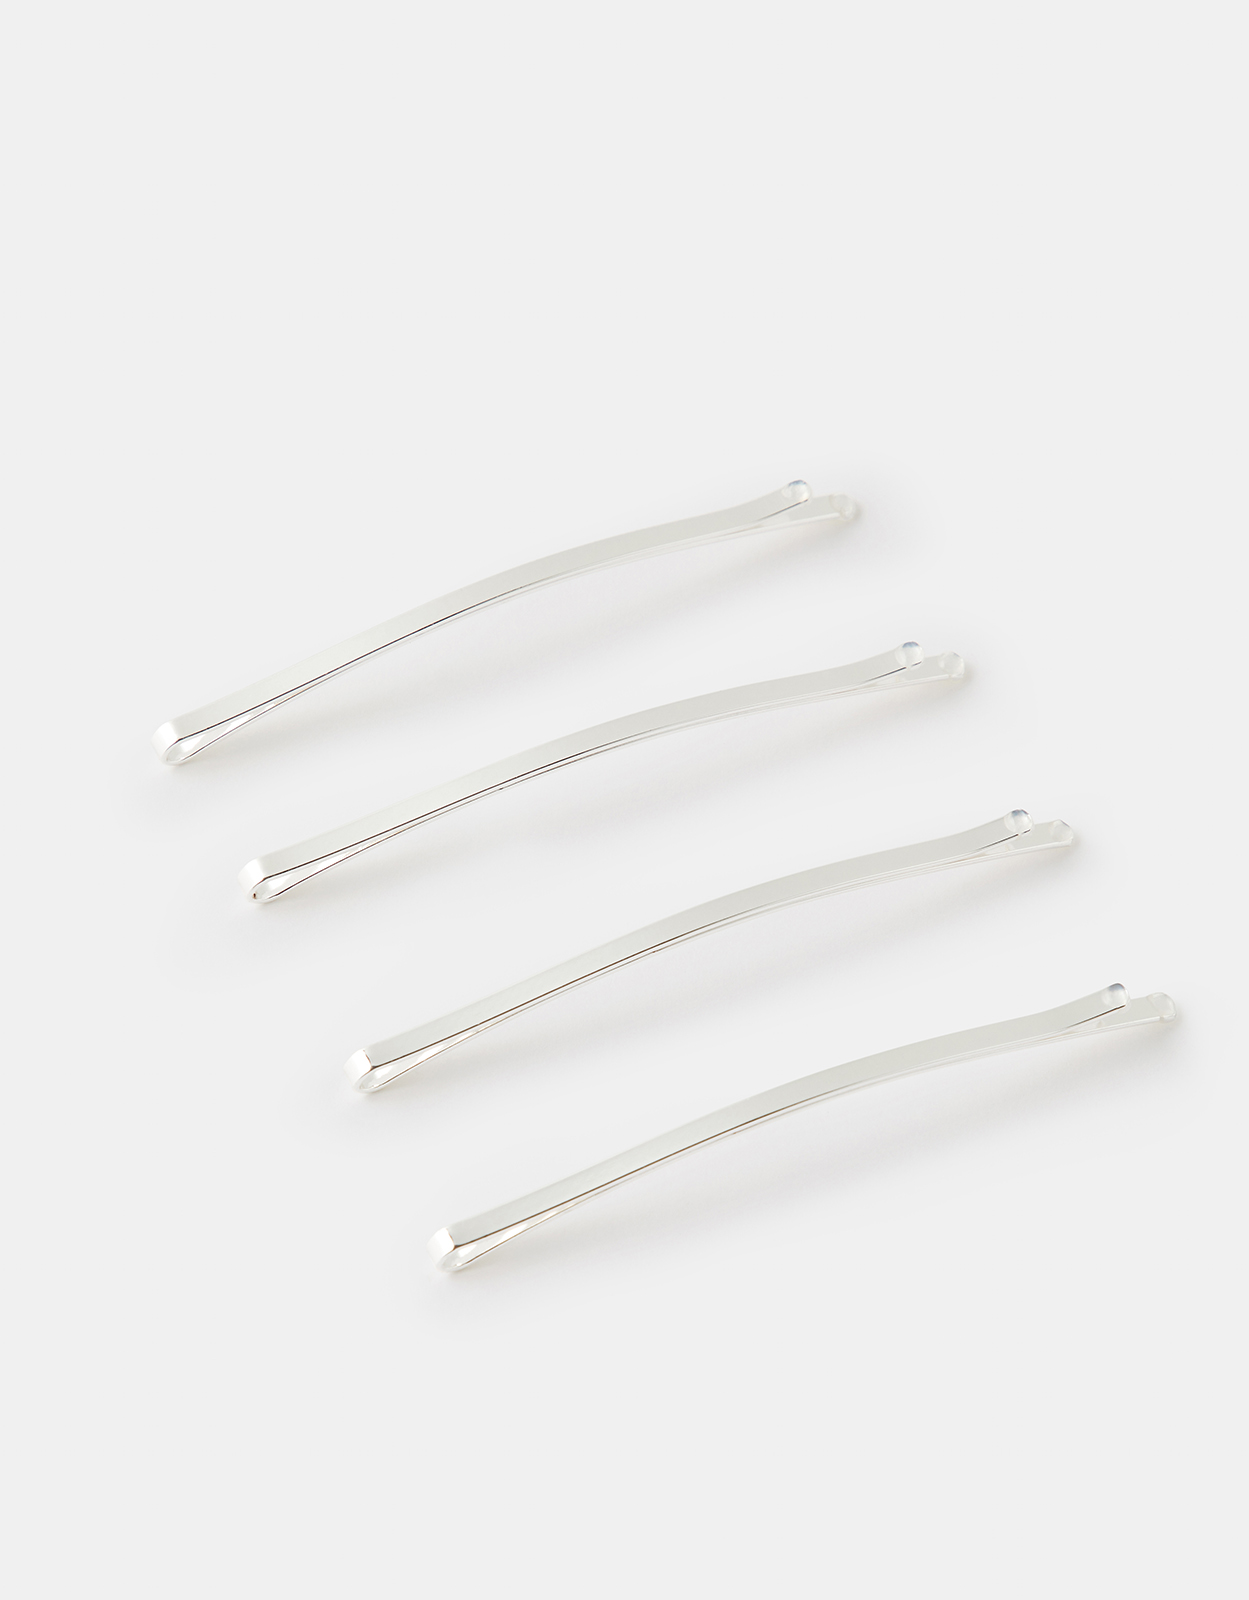 Accessorize Women's Long Curved Hair Slides 4 Pack Silver, Size: One Size